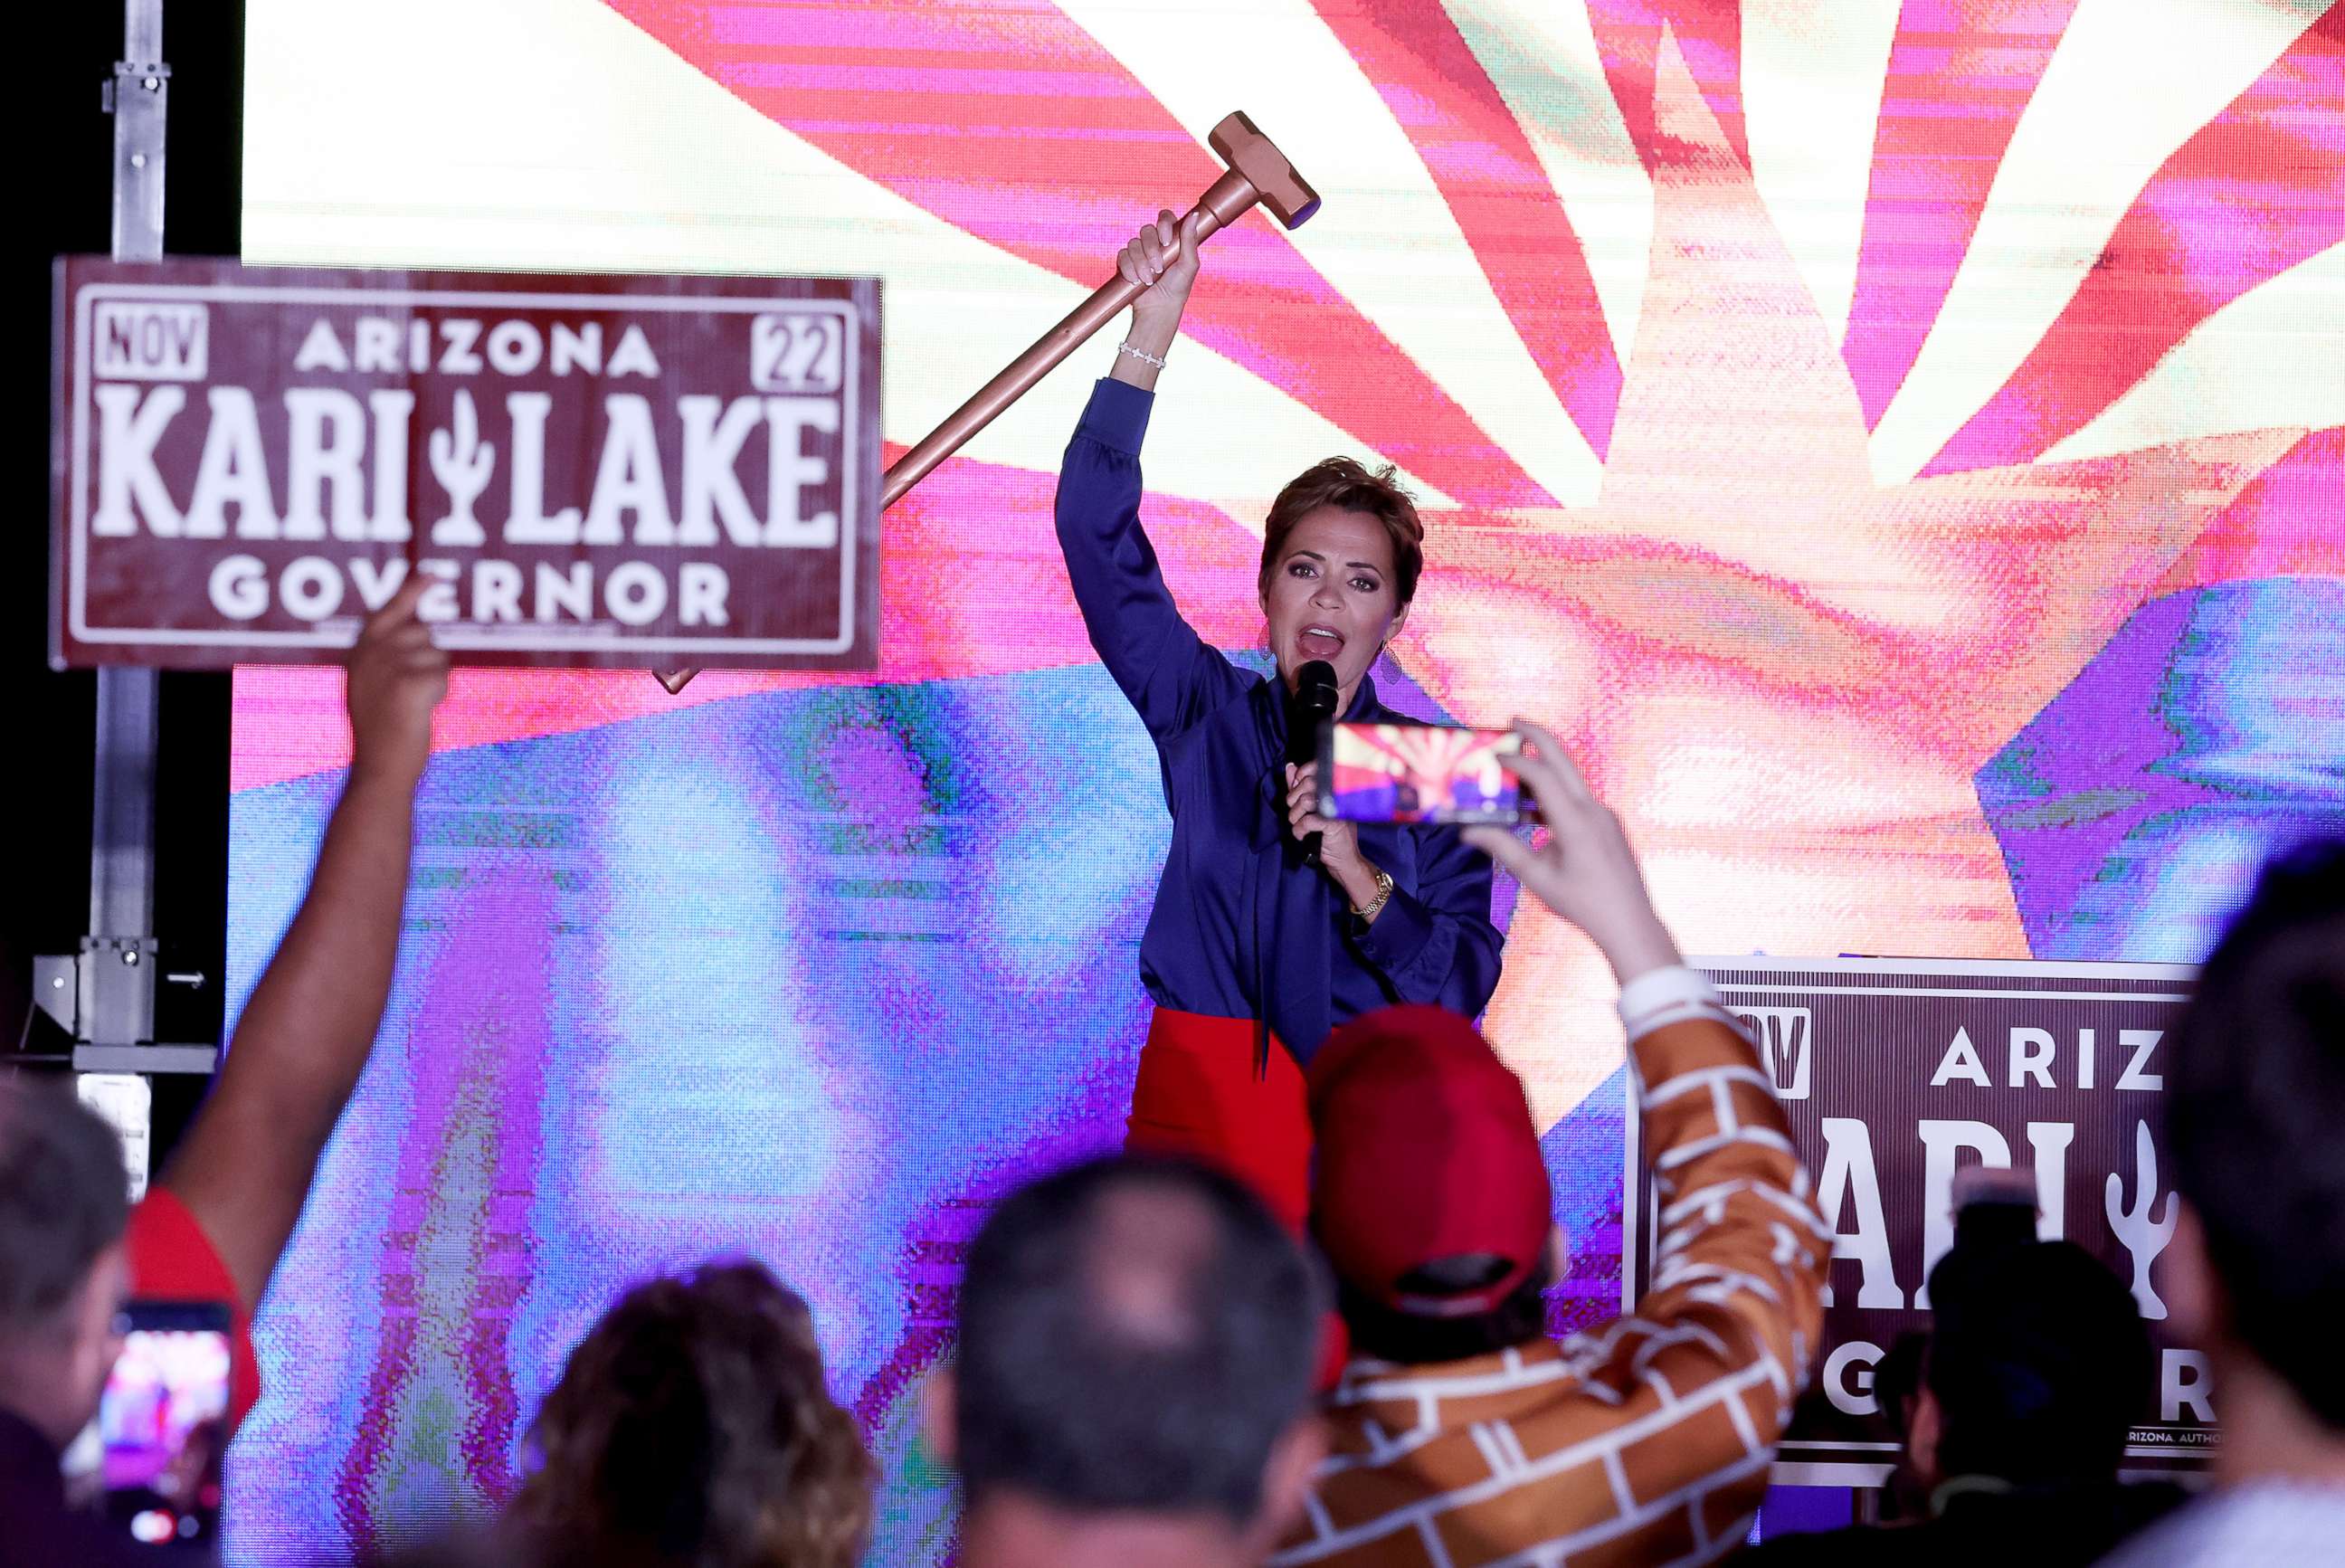 PHOTO: Republican candidate for Arizona Governor Kari Lake holds up a sledgehammer as she speaks to supporters that are waiting around as ballots continue to be counted during her primary election night gathering in Scottsdale, Ariz., Aug. 3, 2022.